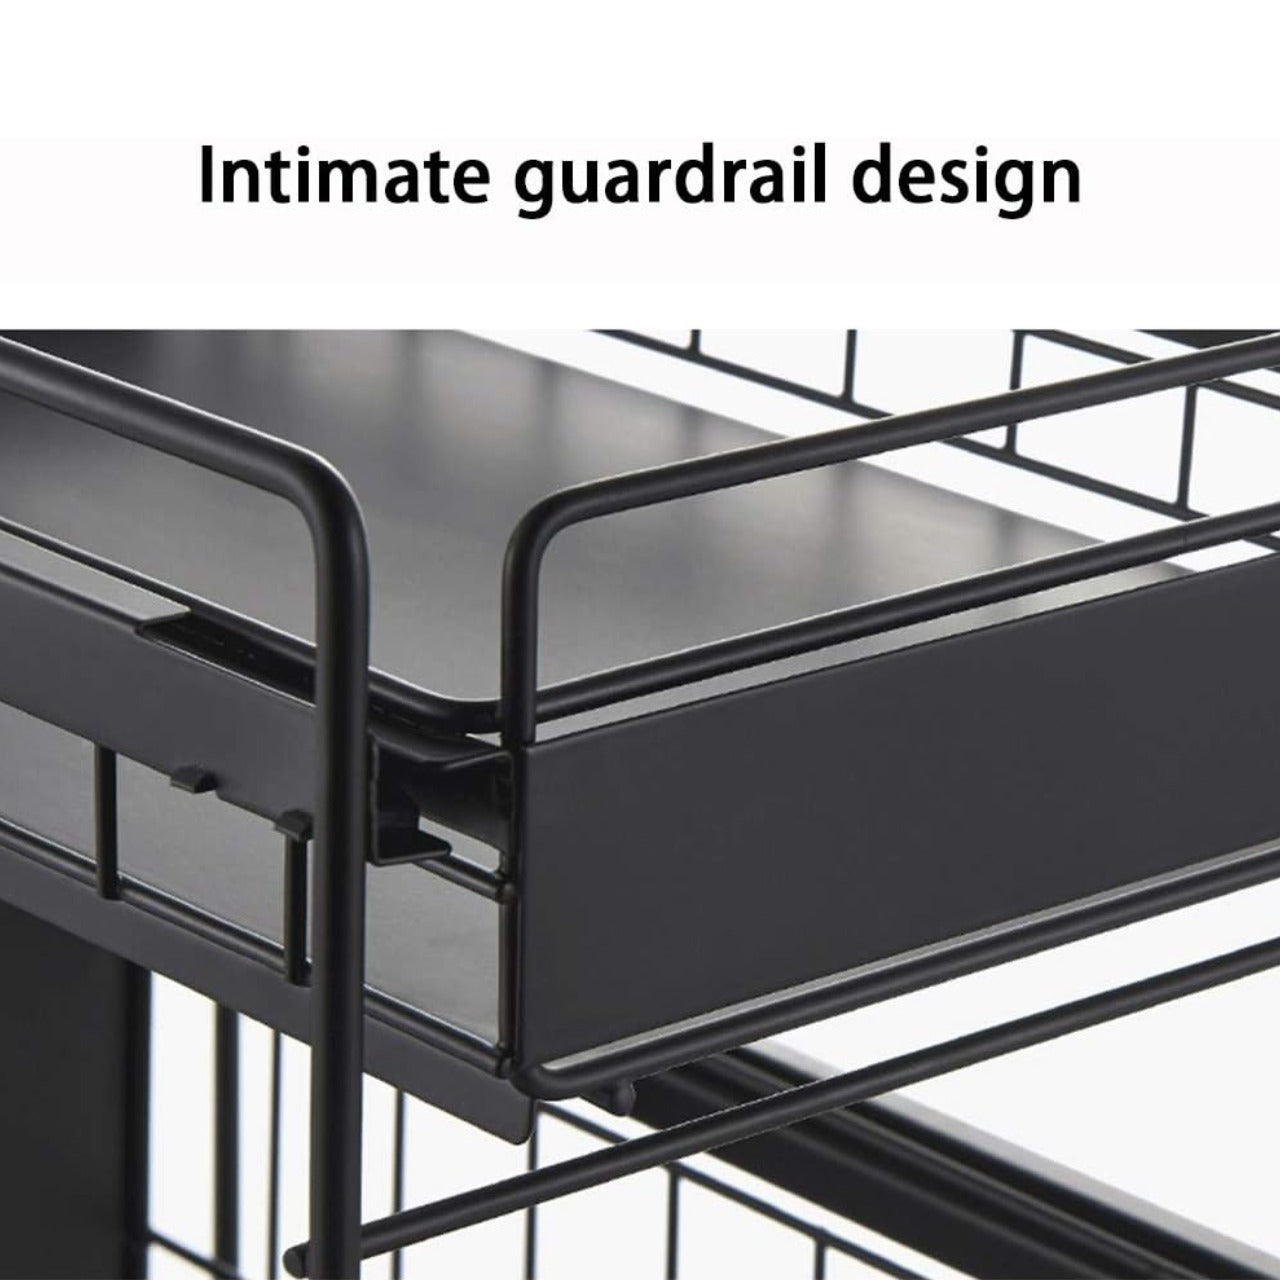 Under Sink Storage Rack with an intimate and guardrail design